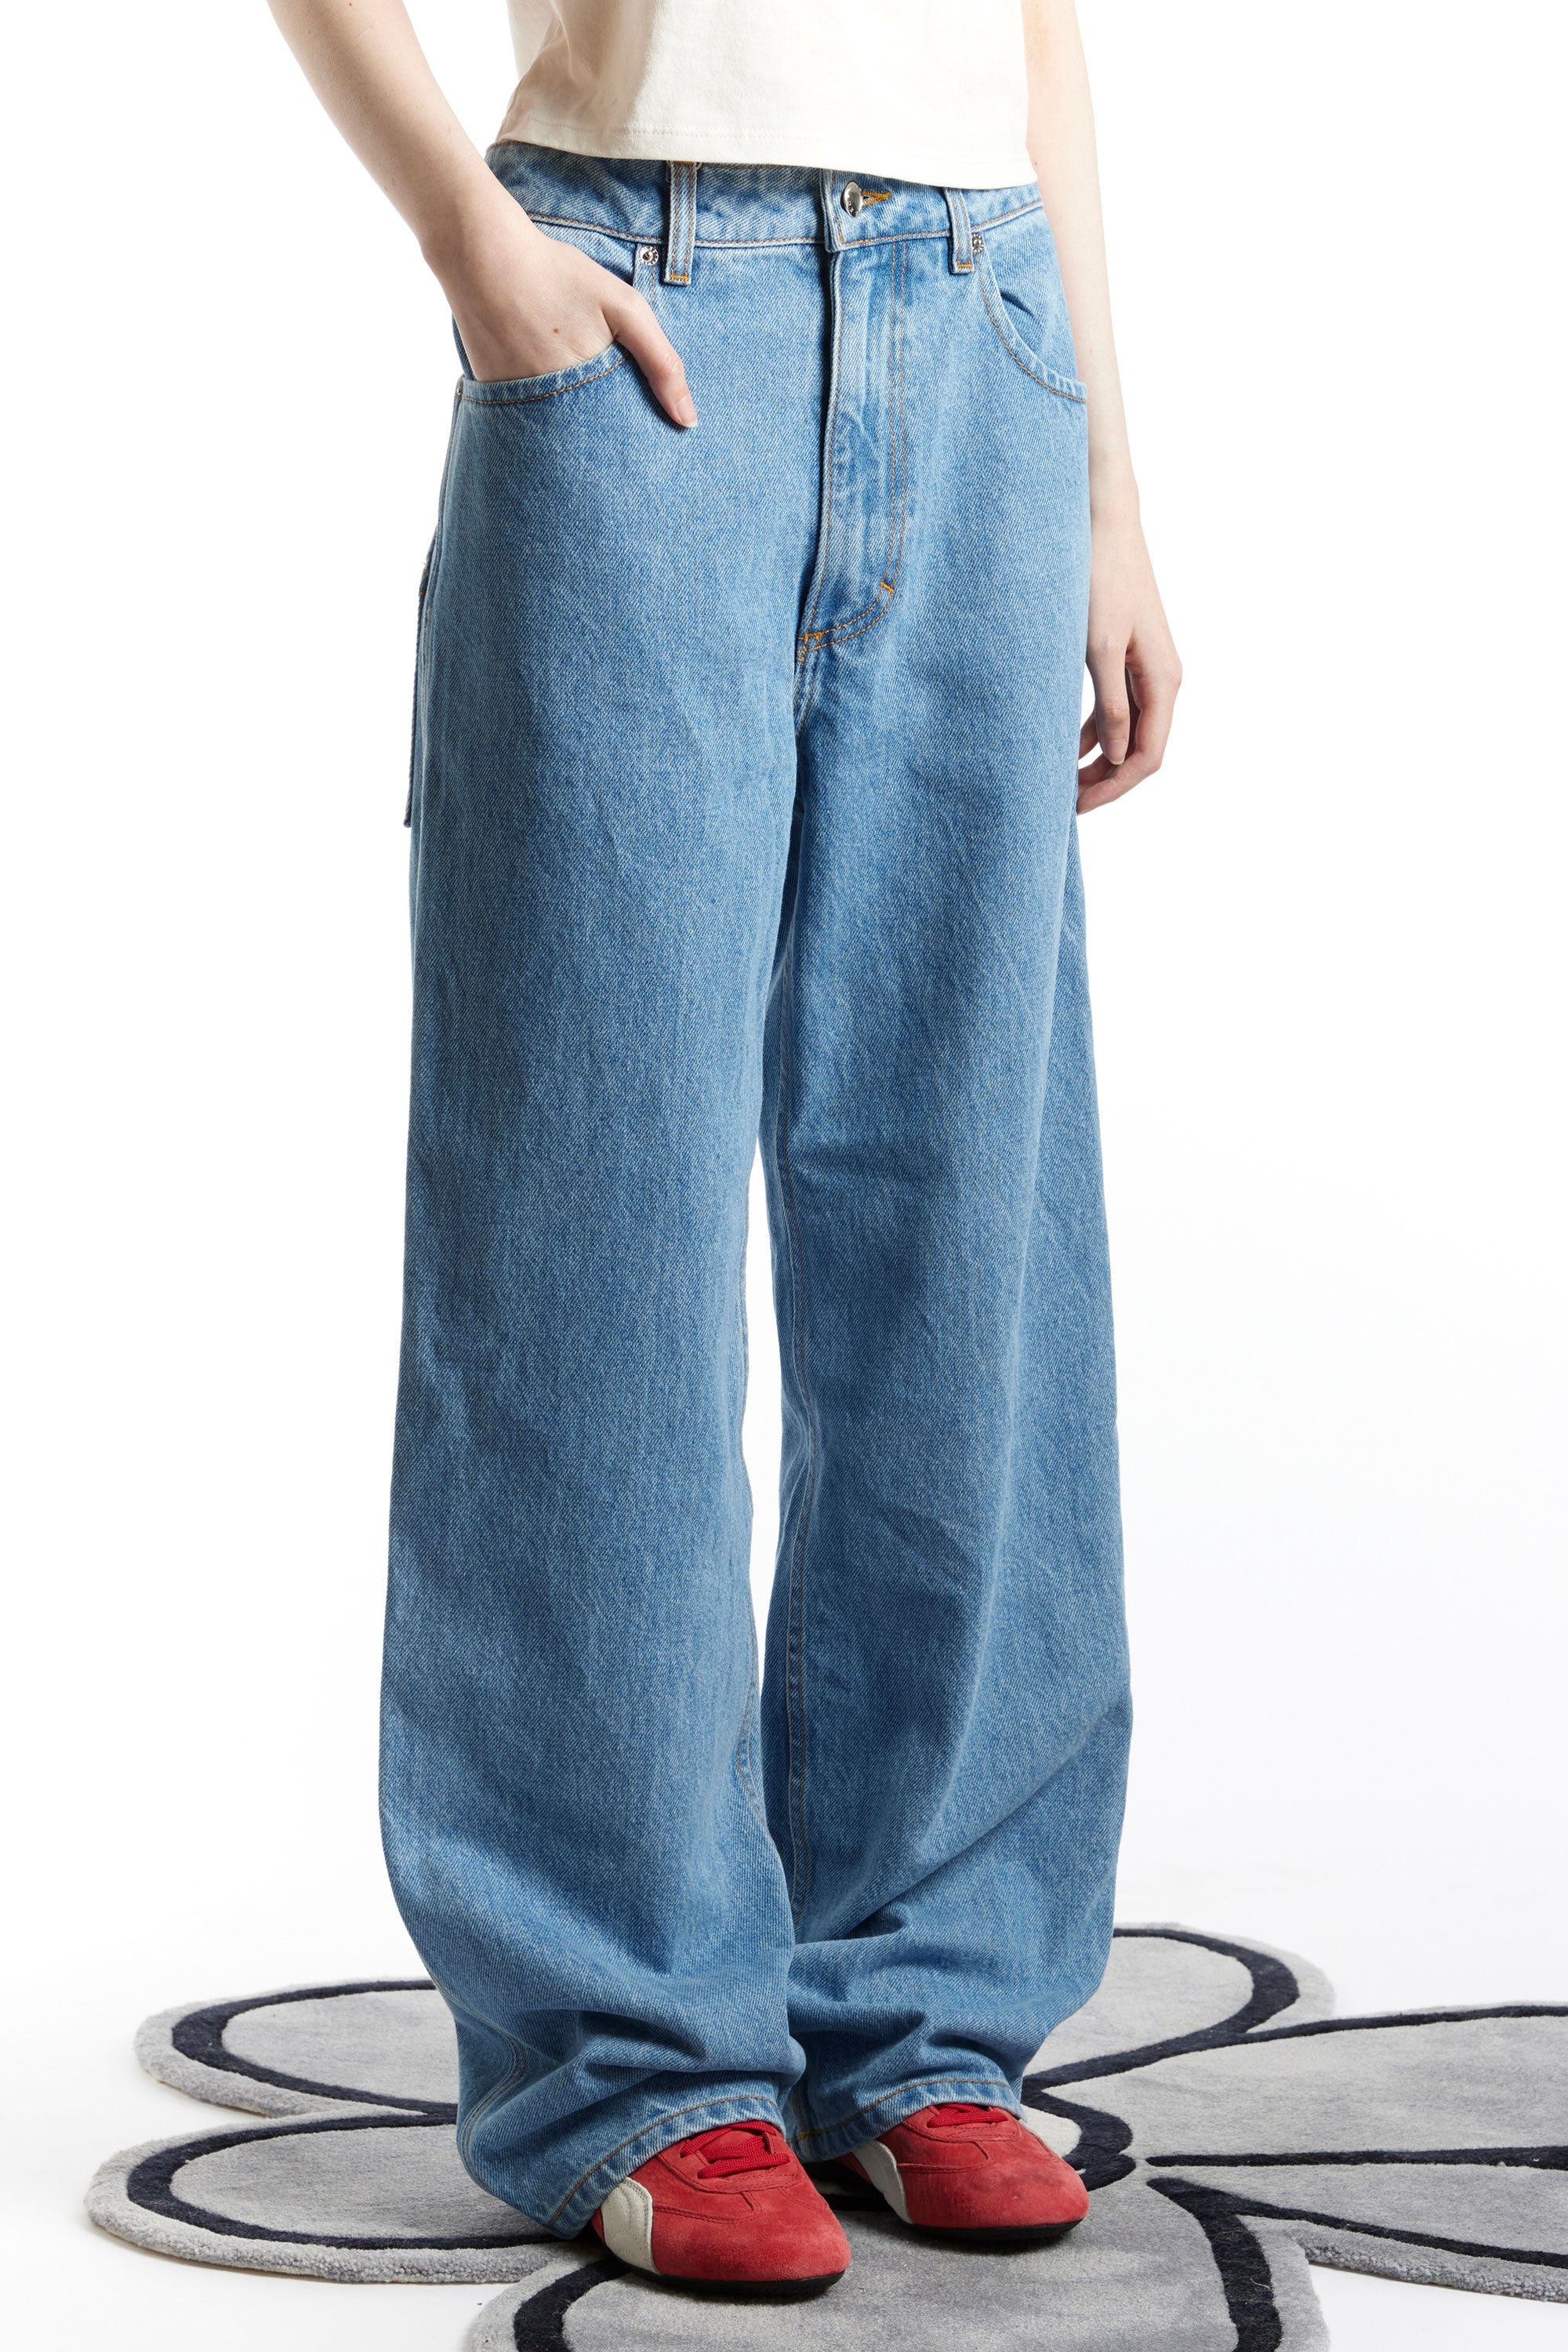 The ECKHAUS LATTA - WIDE LEG JEAN SS23  available online with global shipping, and in PAM Stores Melbourne and Sydney.